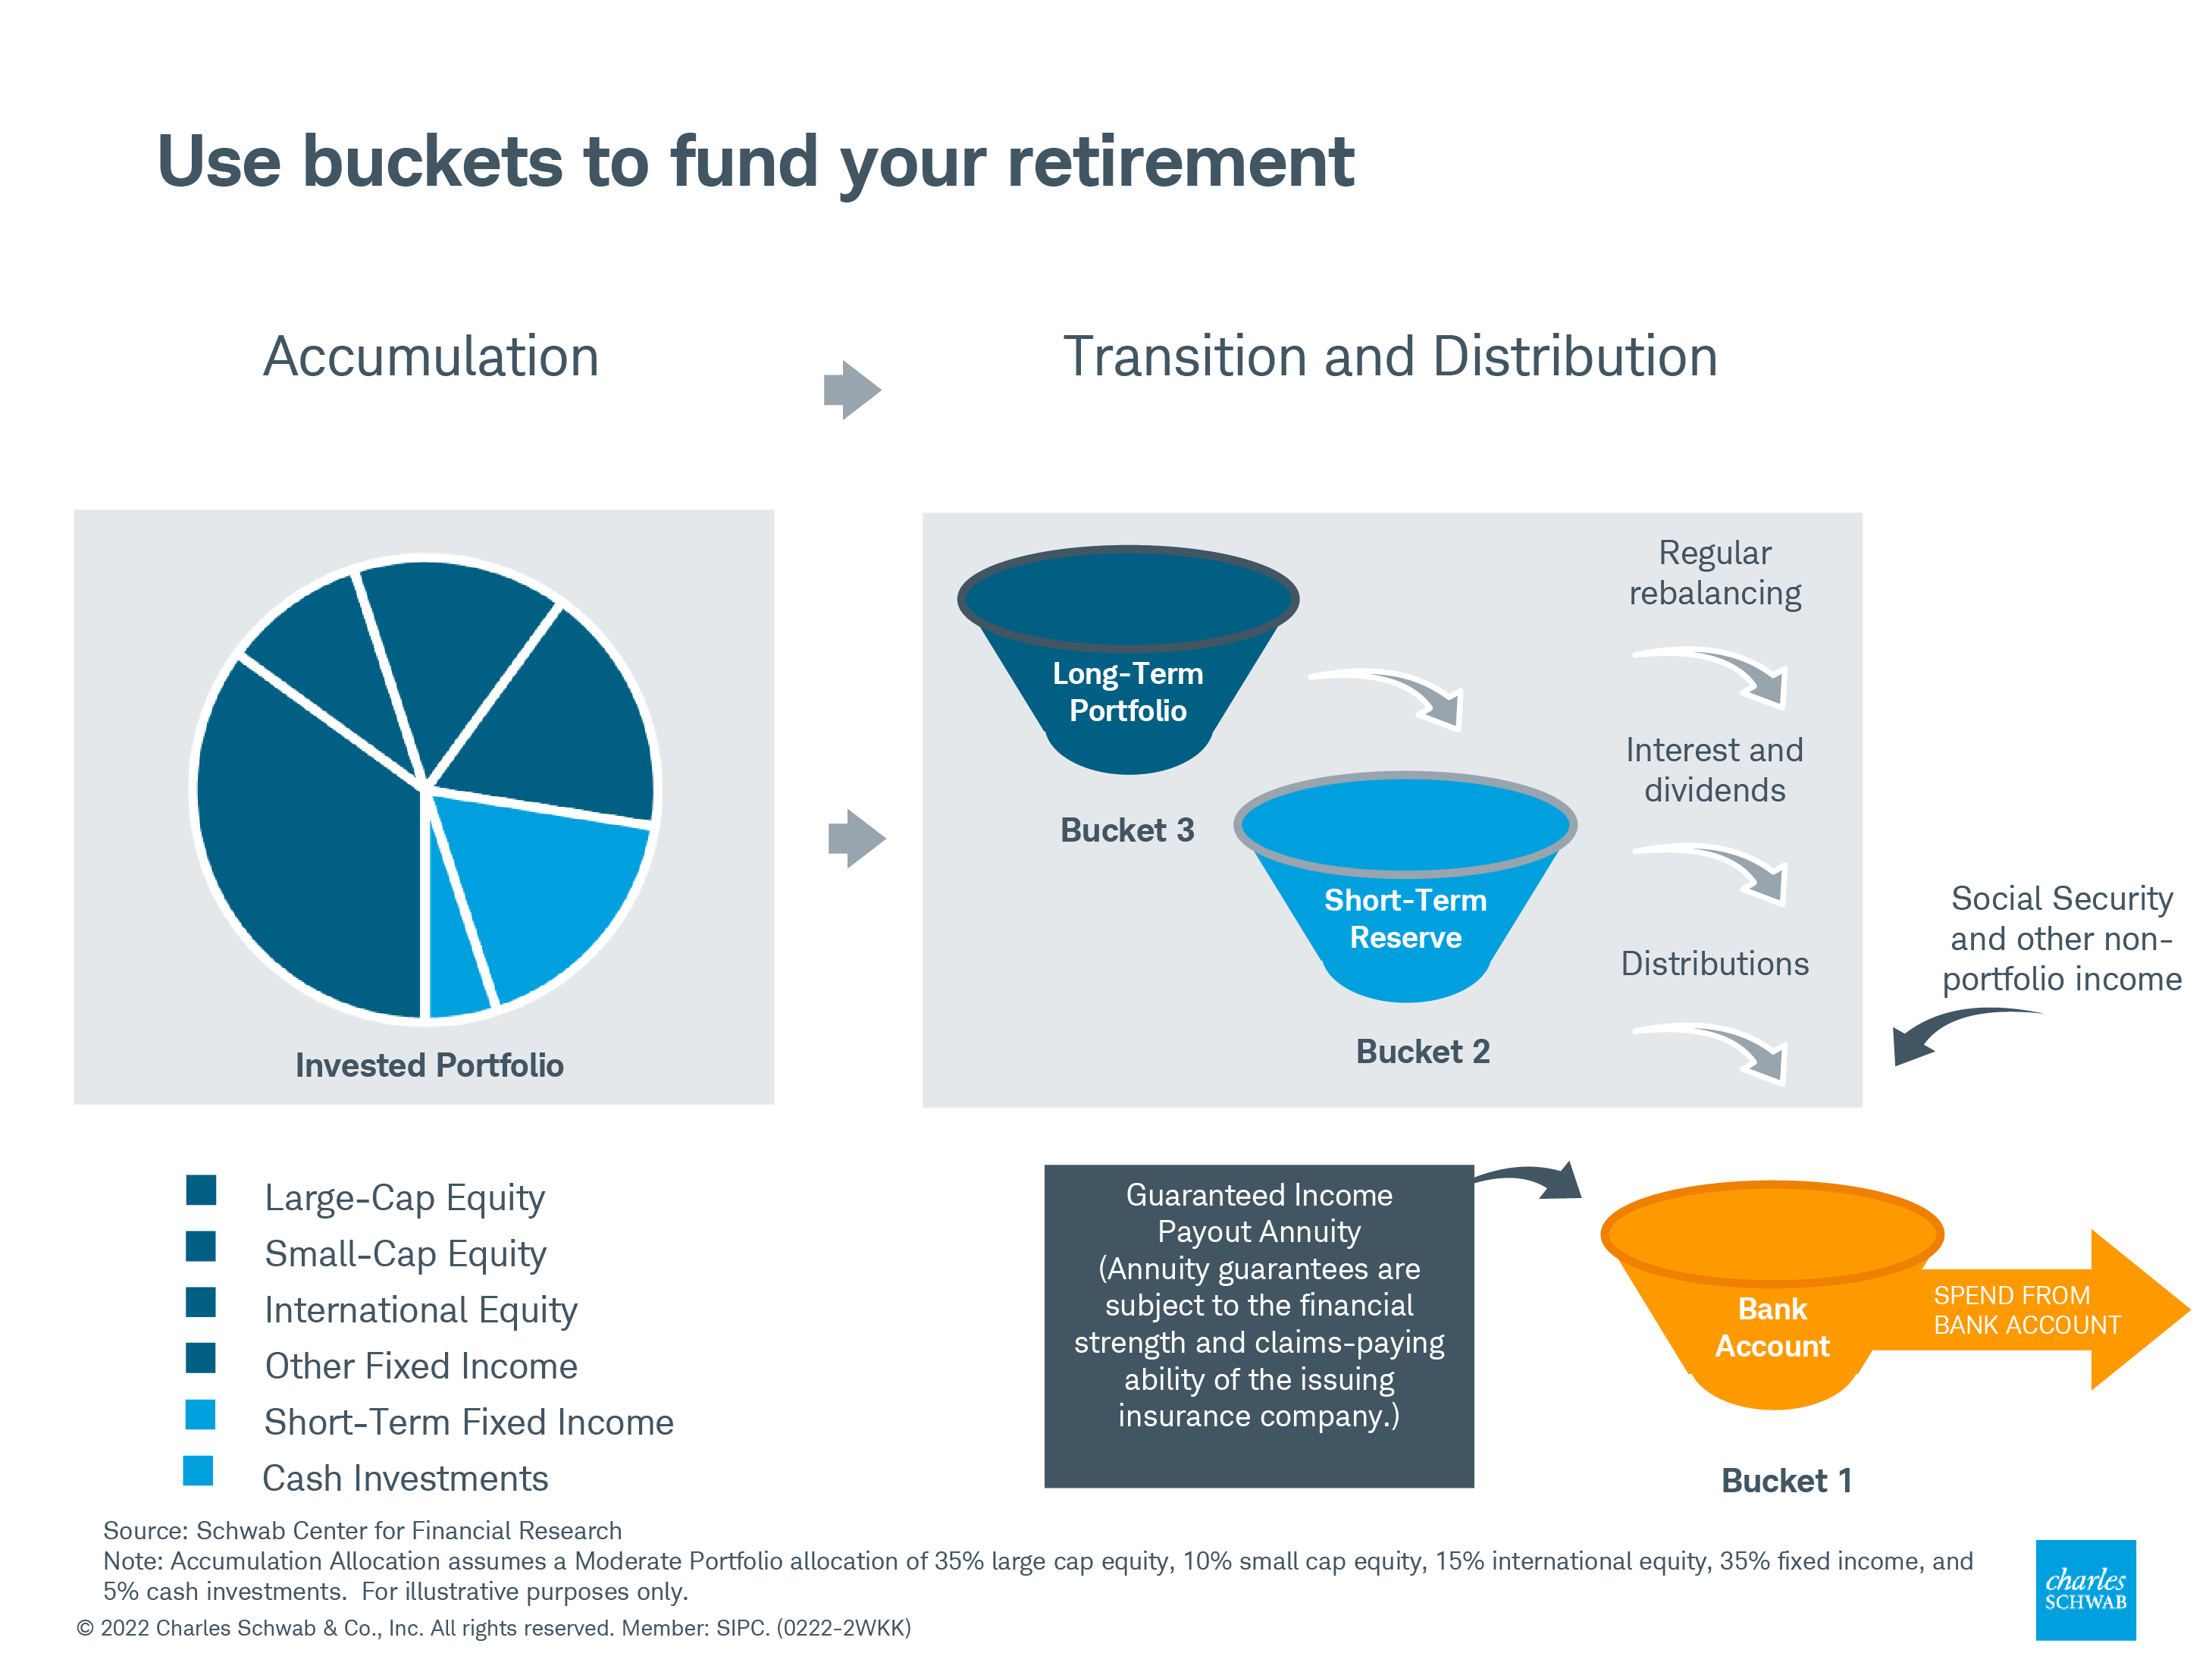 Image illustrates the change from accumulation phase to the transition and distribution phase. During the accumulation phase, investors manage their diversified portfolio; in the transition and distribution phase, investors manage three buckets: their long-term portfolio, short-term reserve, and bank account that can potentially help fund their retirement